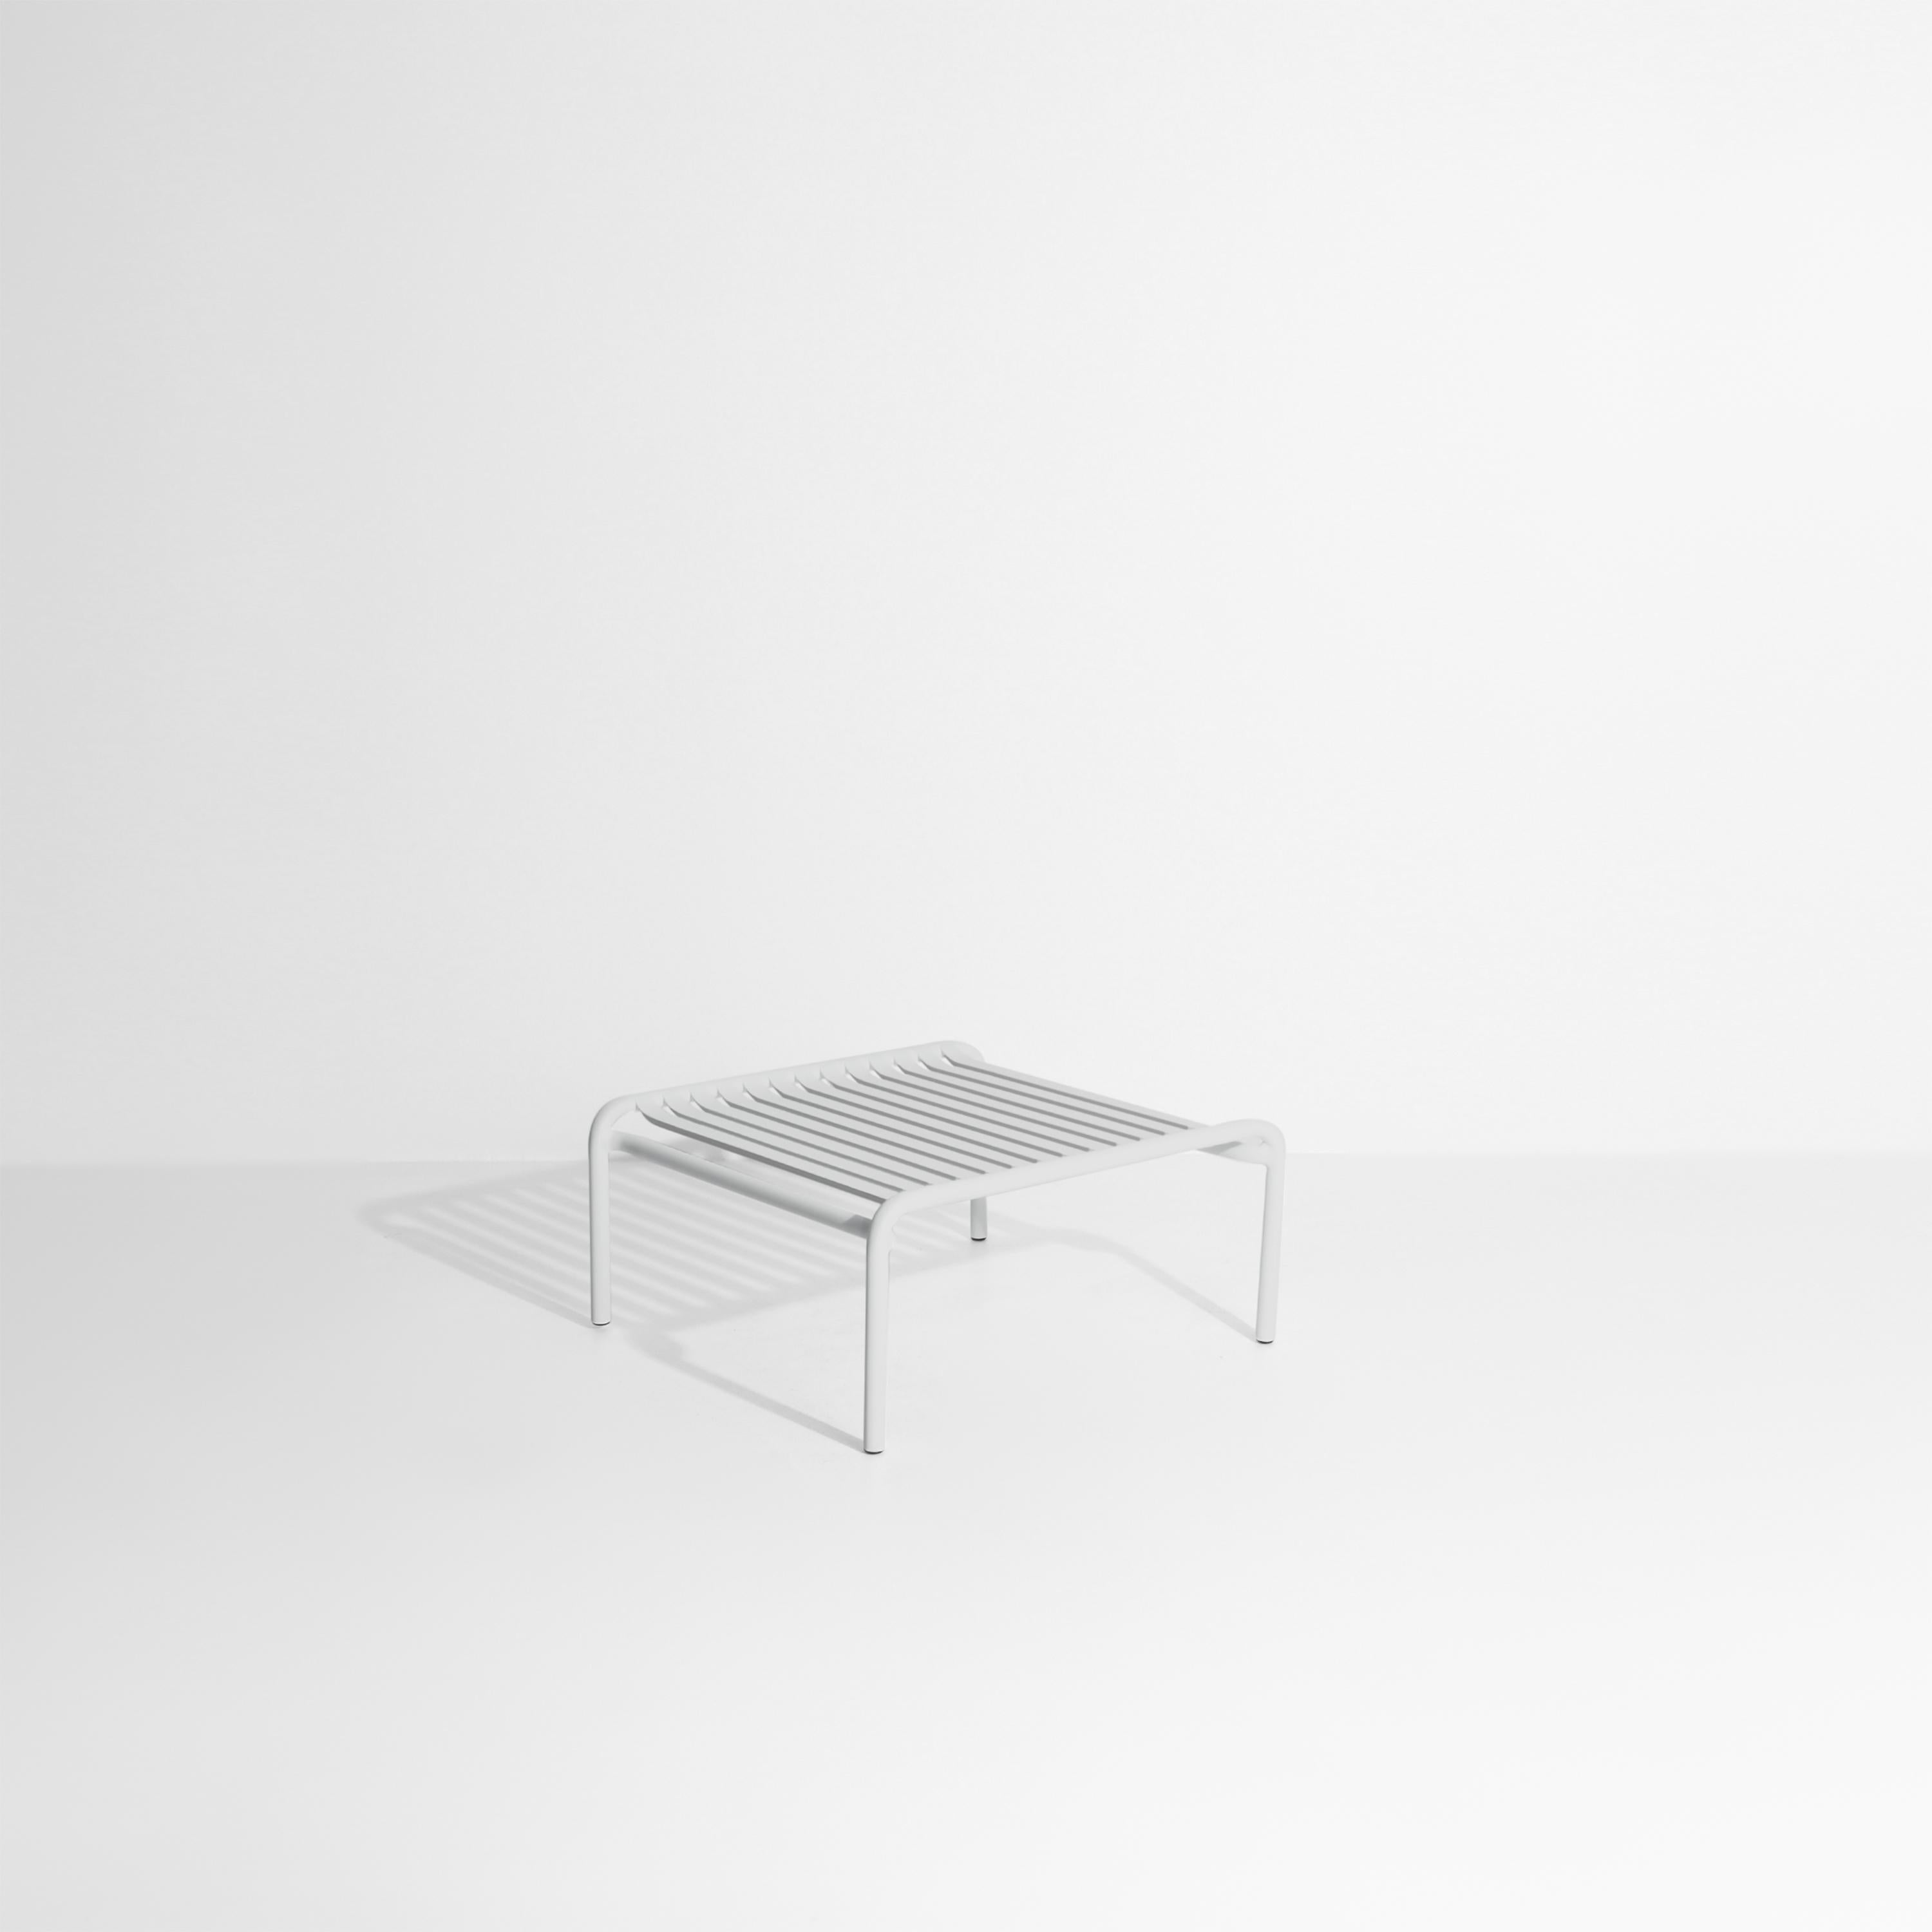 Petite Friture Week-End Coffee Table in Pearl Grey Aluminium by Studio BrichetZiegler, 2017

The week-end collection is a full range of outdoor furniture, in aluminium grained epoxy paint, matt finish, that includes 18 functions and 8 colours for